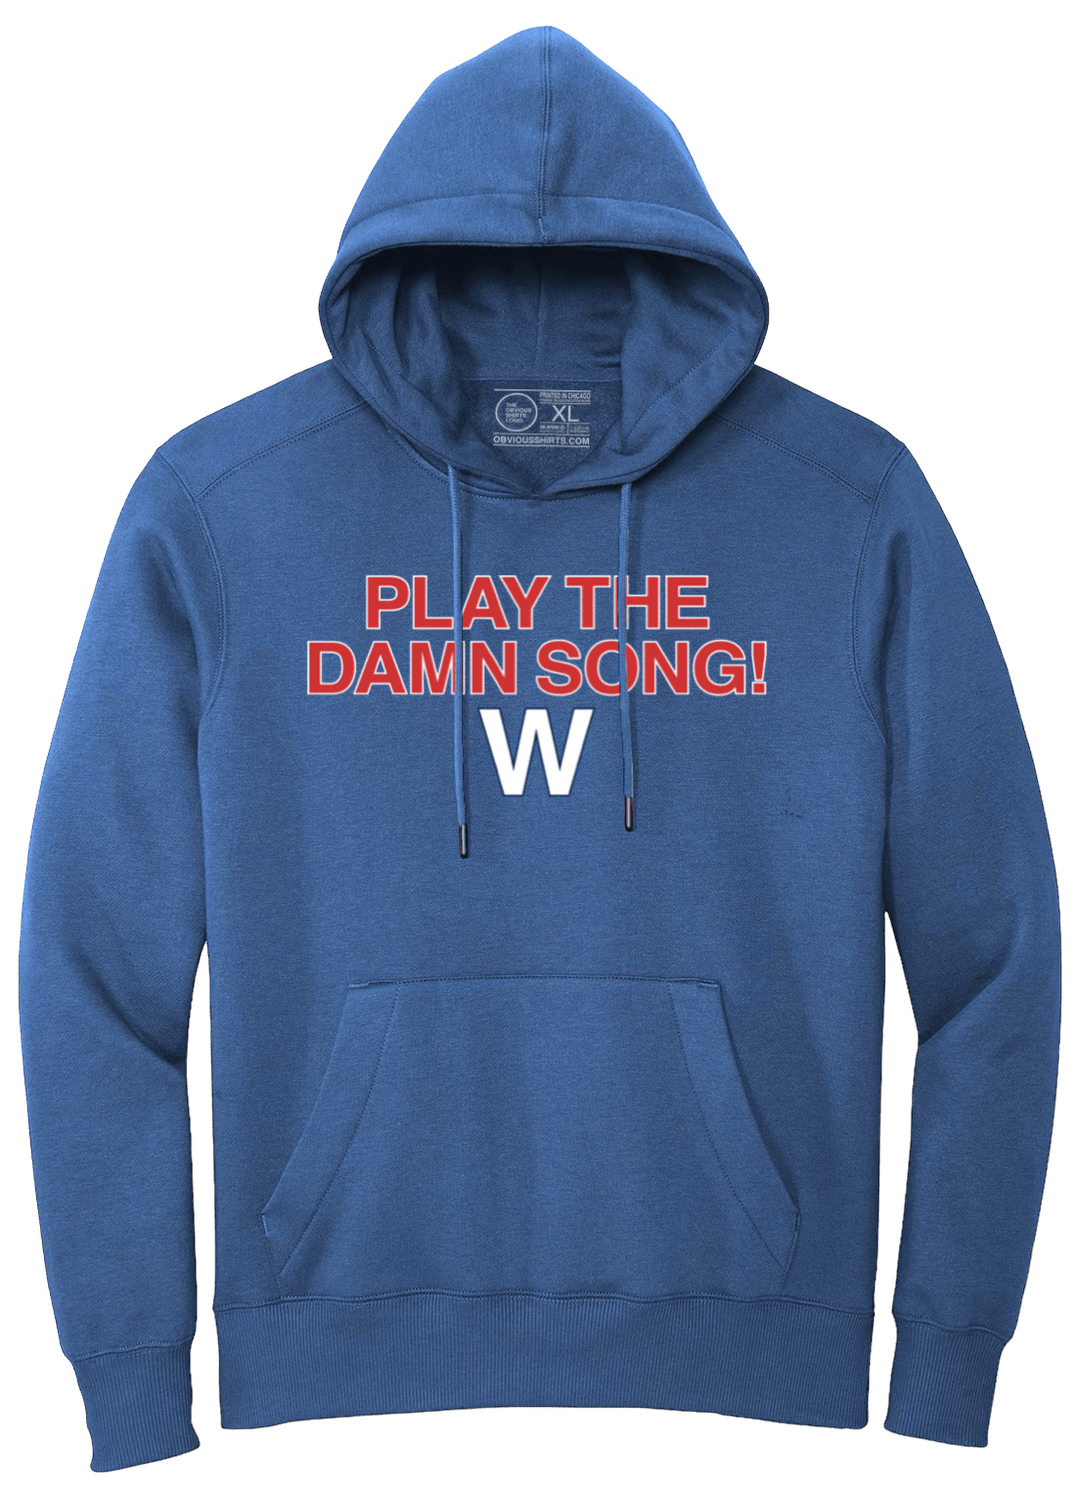 PLAY THE DAMN SONG! (HOODED SWEATSHIRT) - OBVIOUS SHIRTS